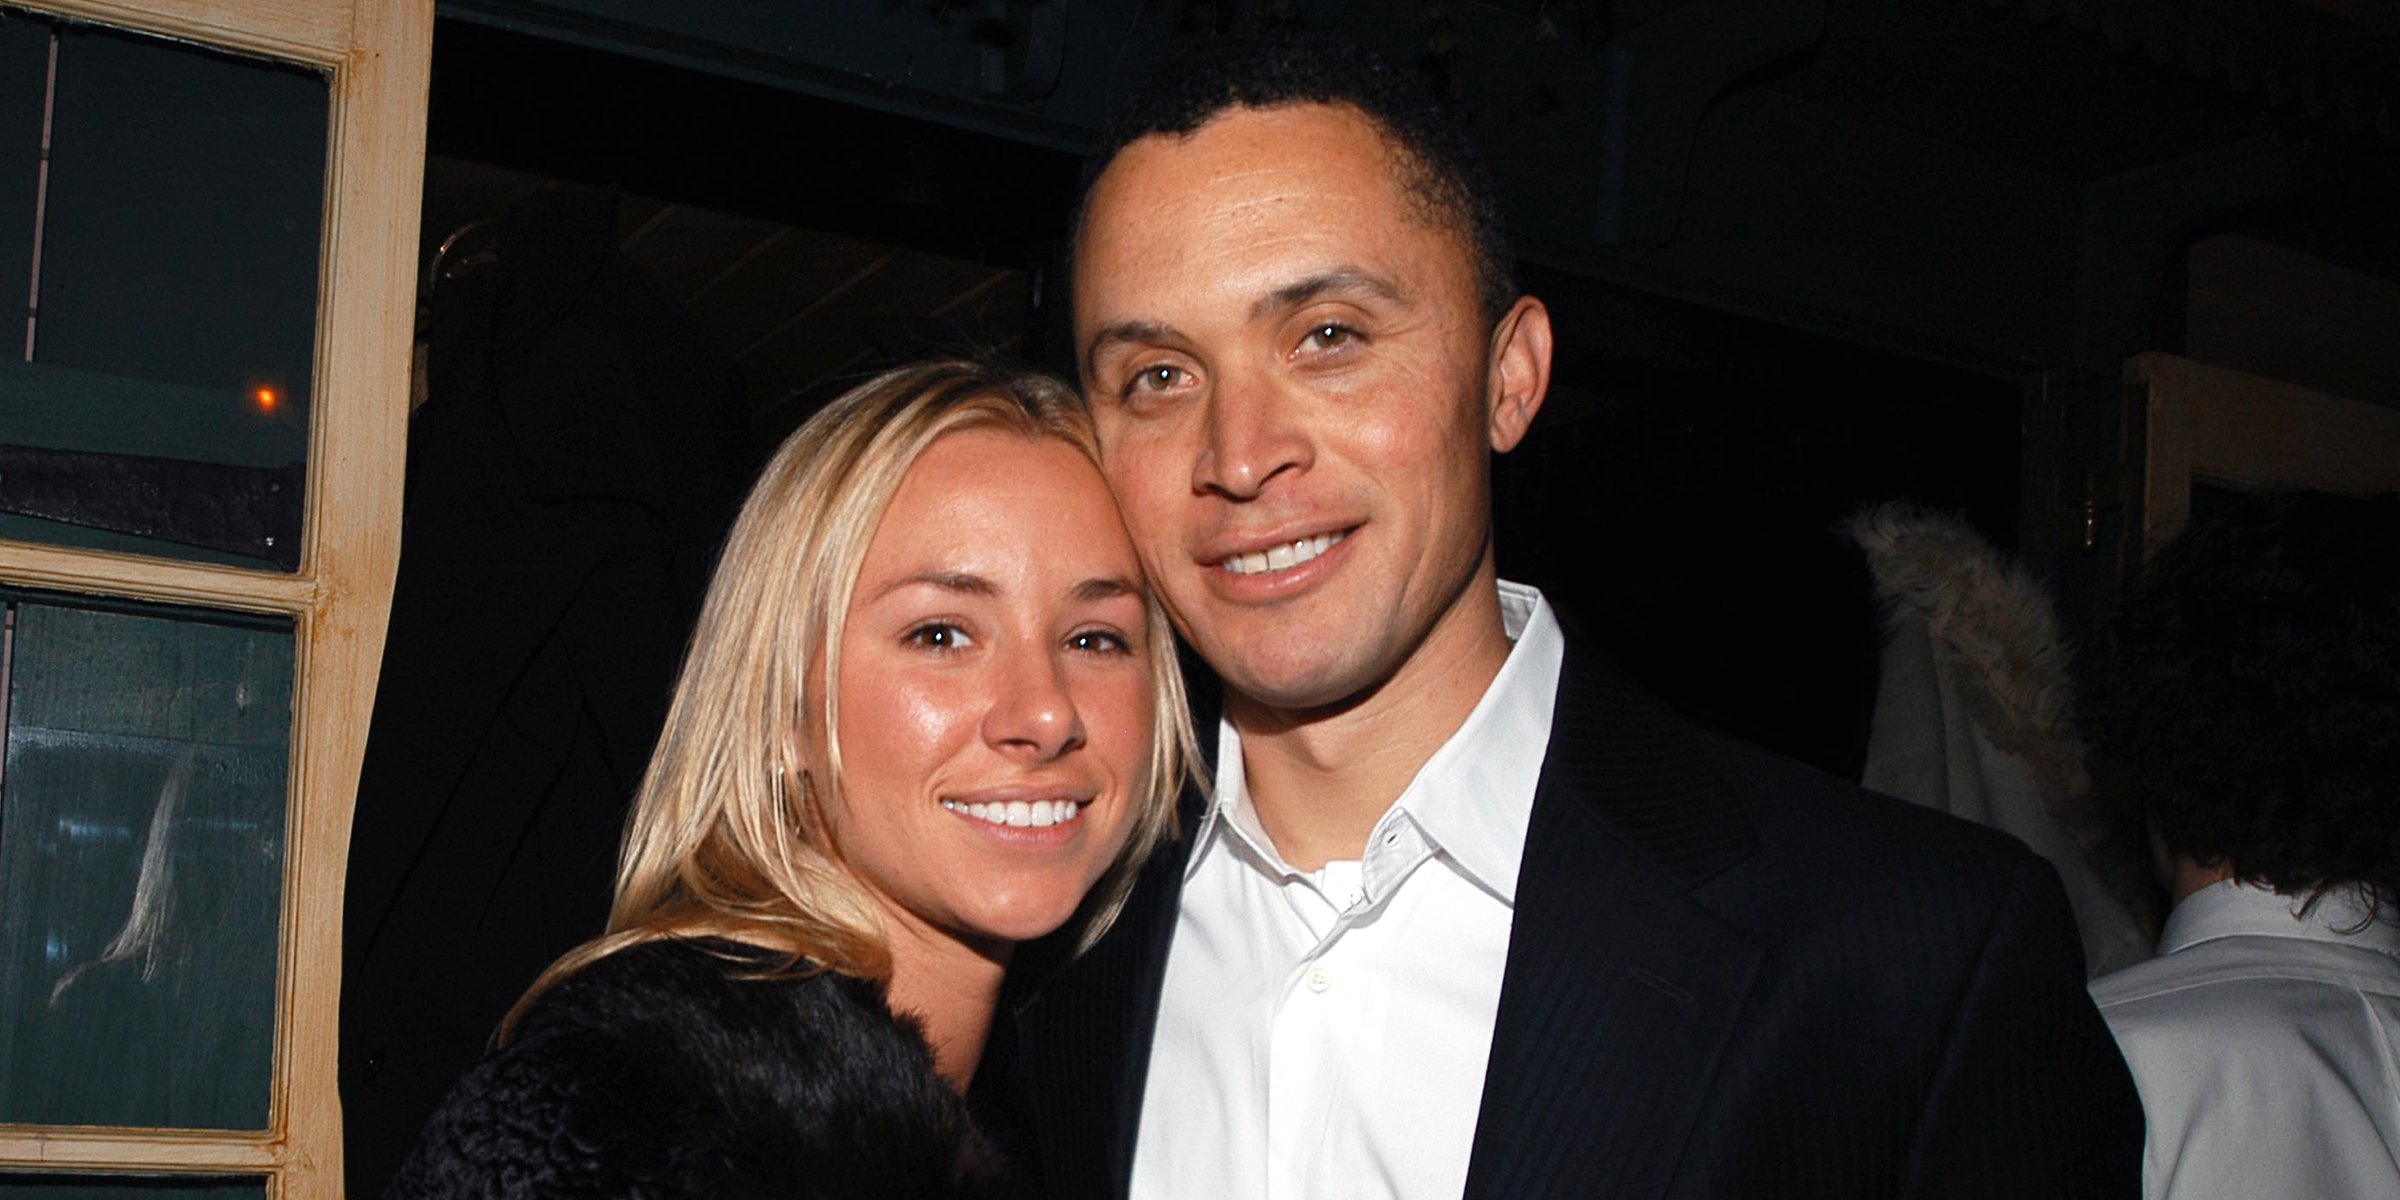 Emily Threlkeld Ford and Harold Ford Jr. | Source: Getty Images